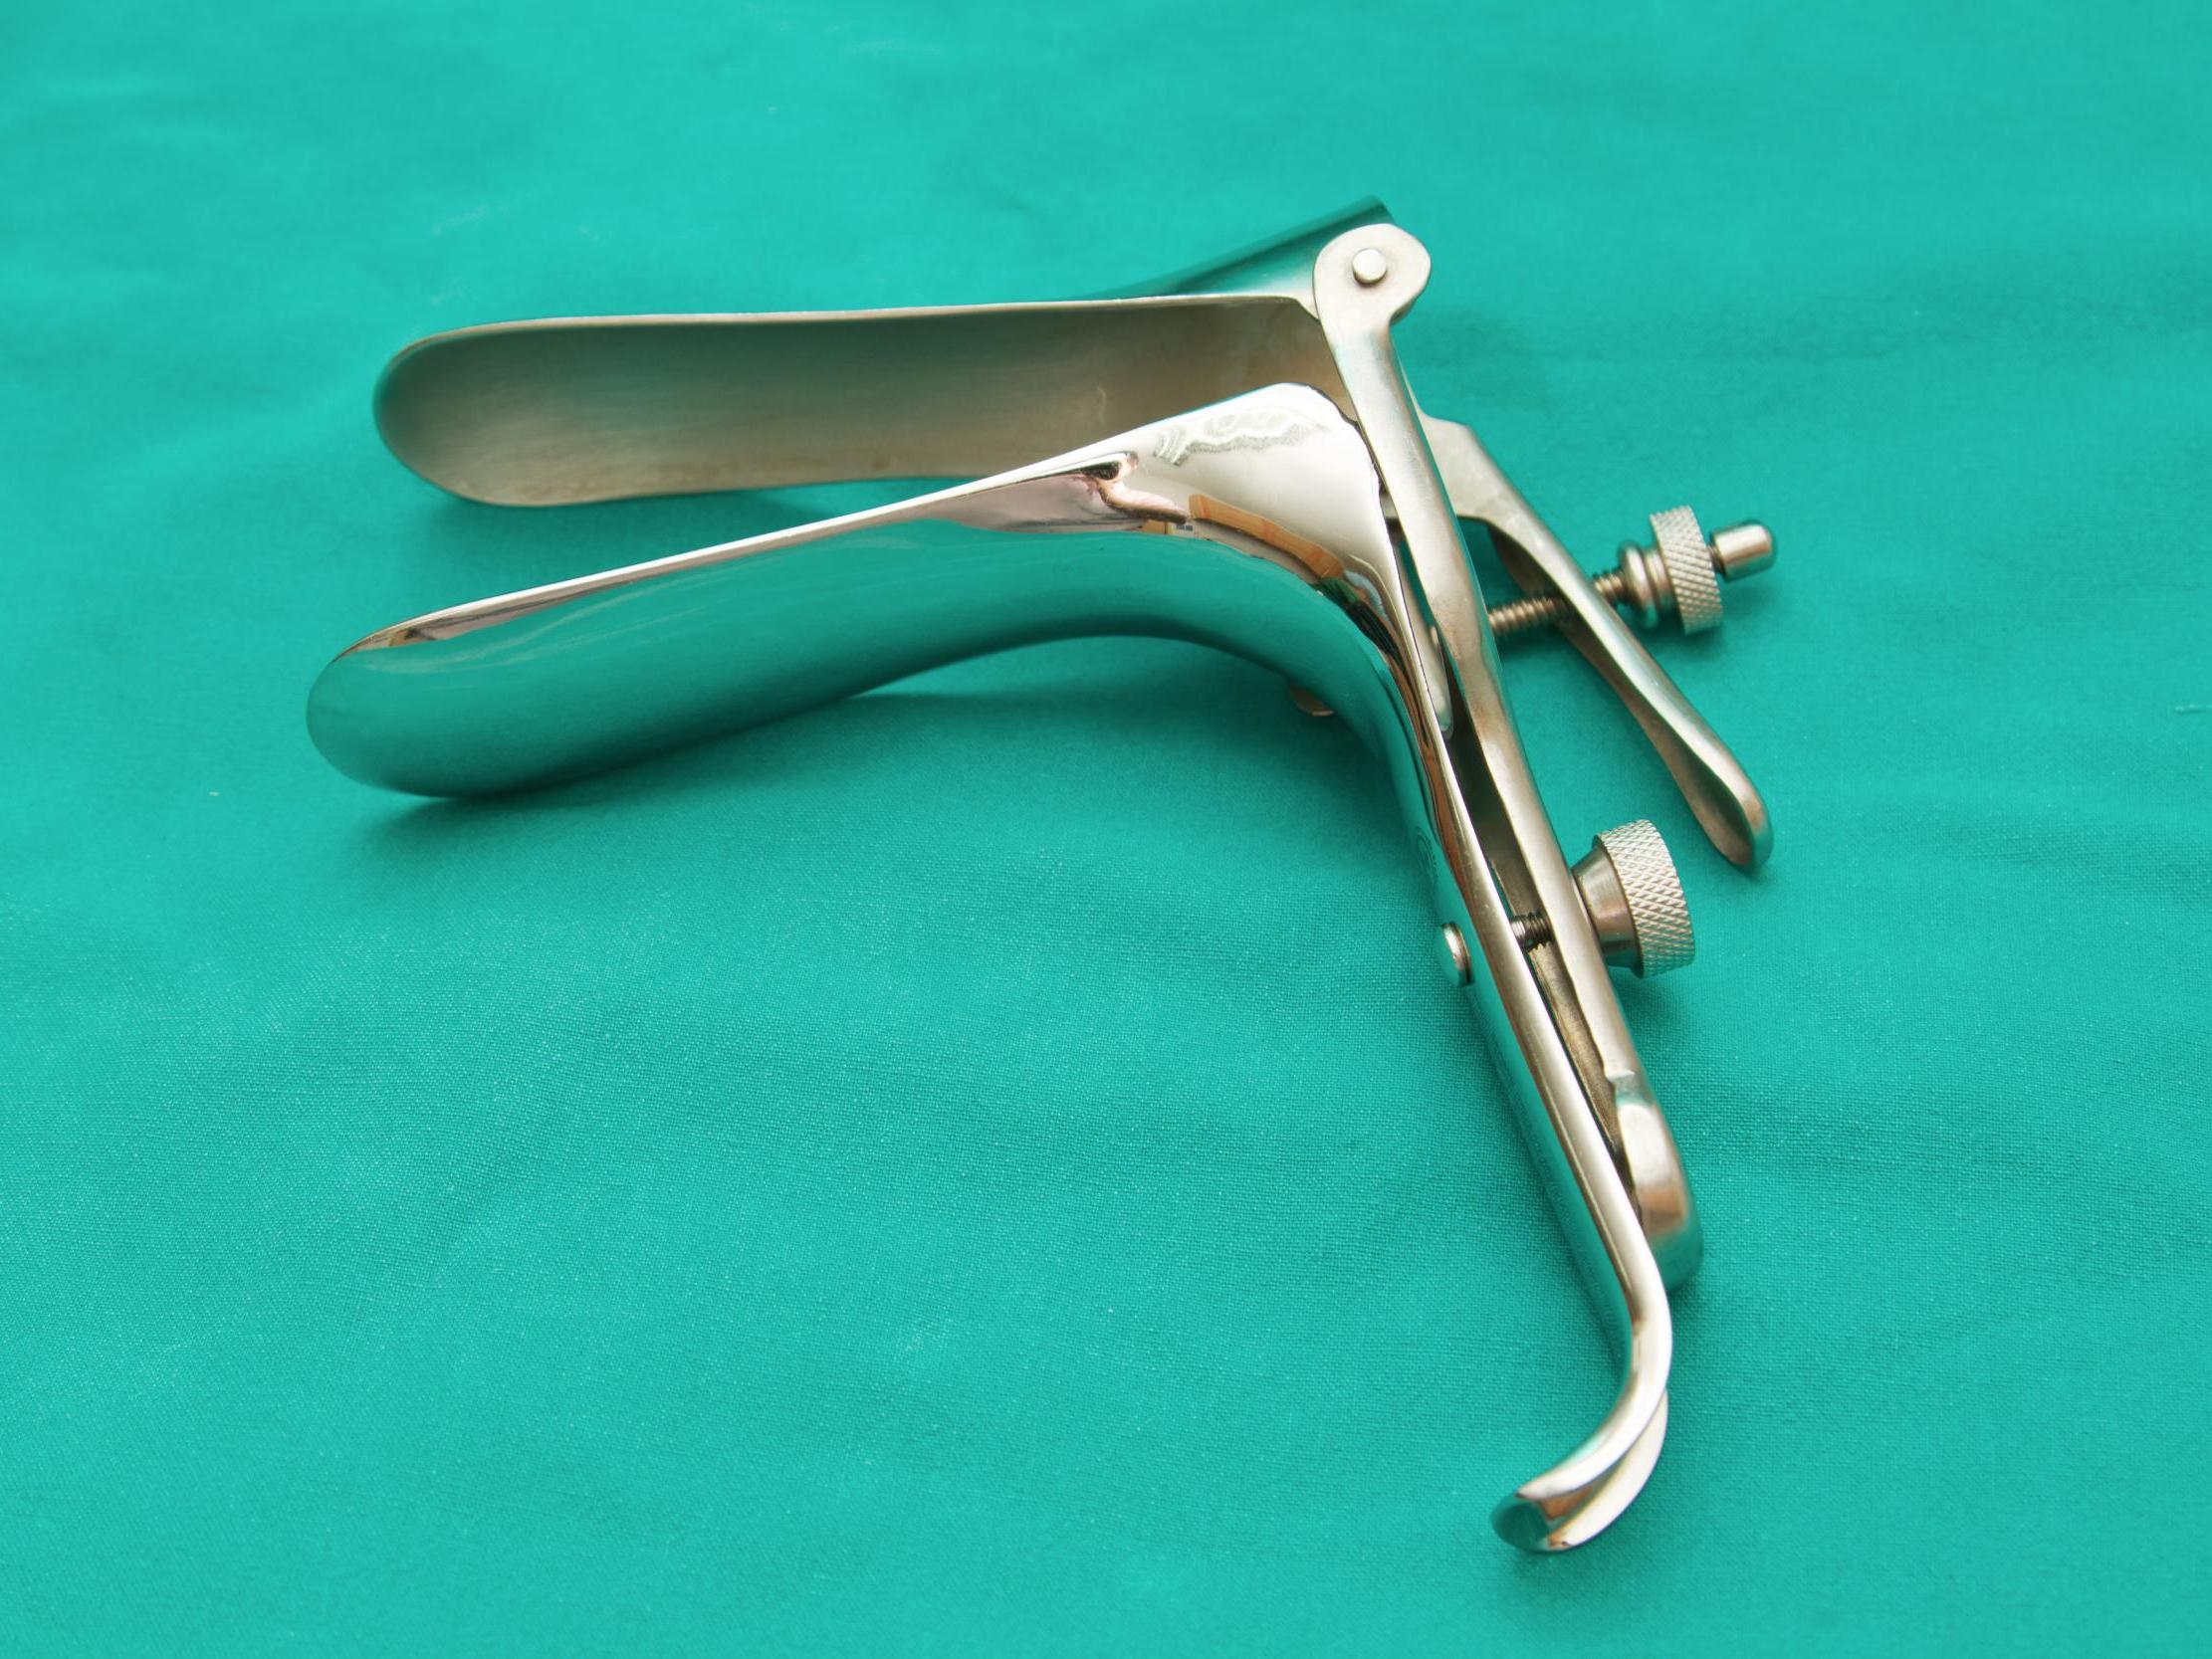 Cervical Screening 2022 How Enduring Use Of 150 Year Old Speculum Puts Women Off Smear Tests